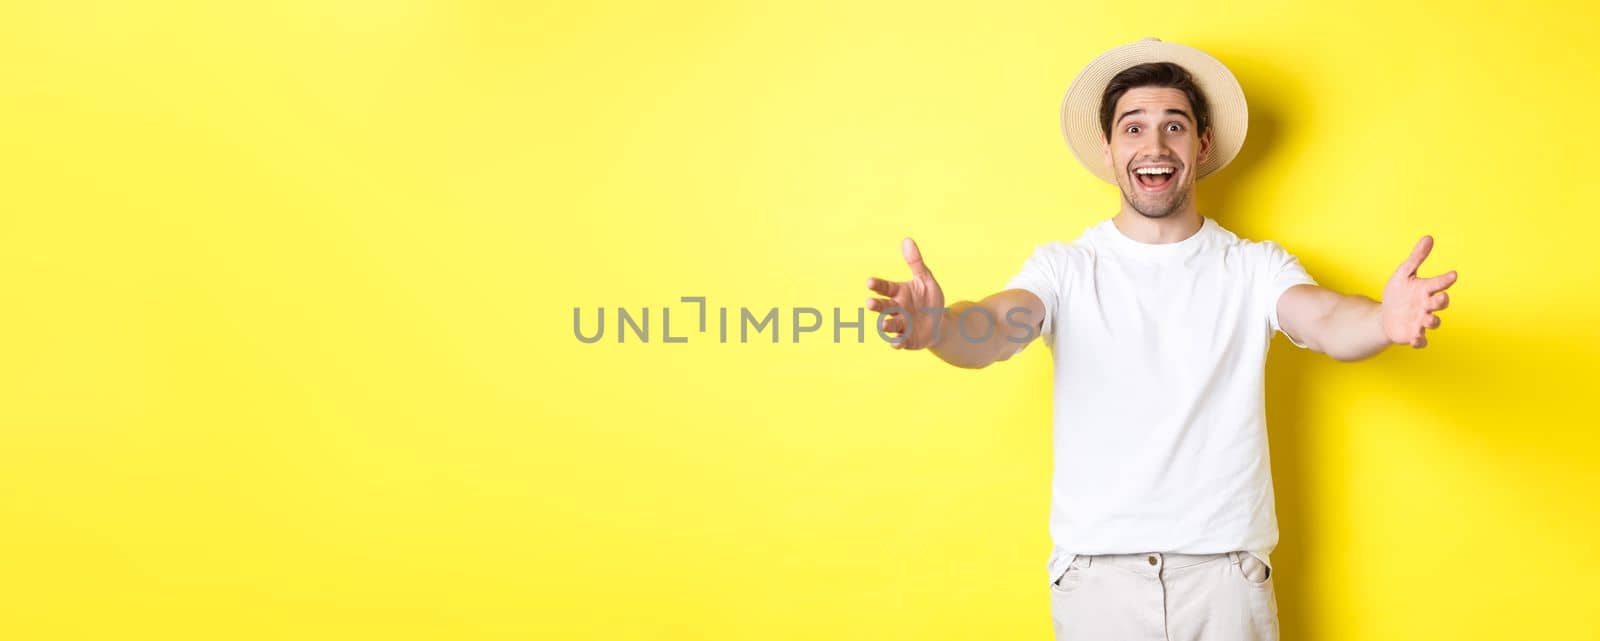 Concept of tourism and summer. Happy and friendly man traveller reaching hands for hug, greeting or welcome you, standing over yellow background.